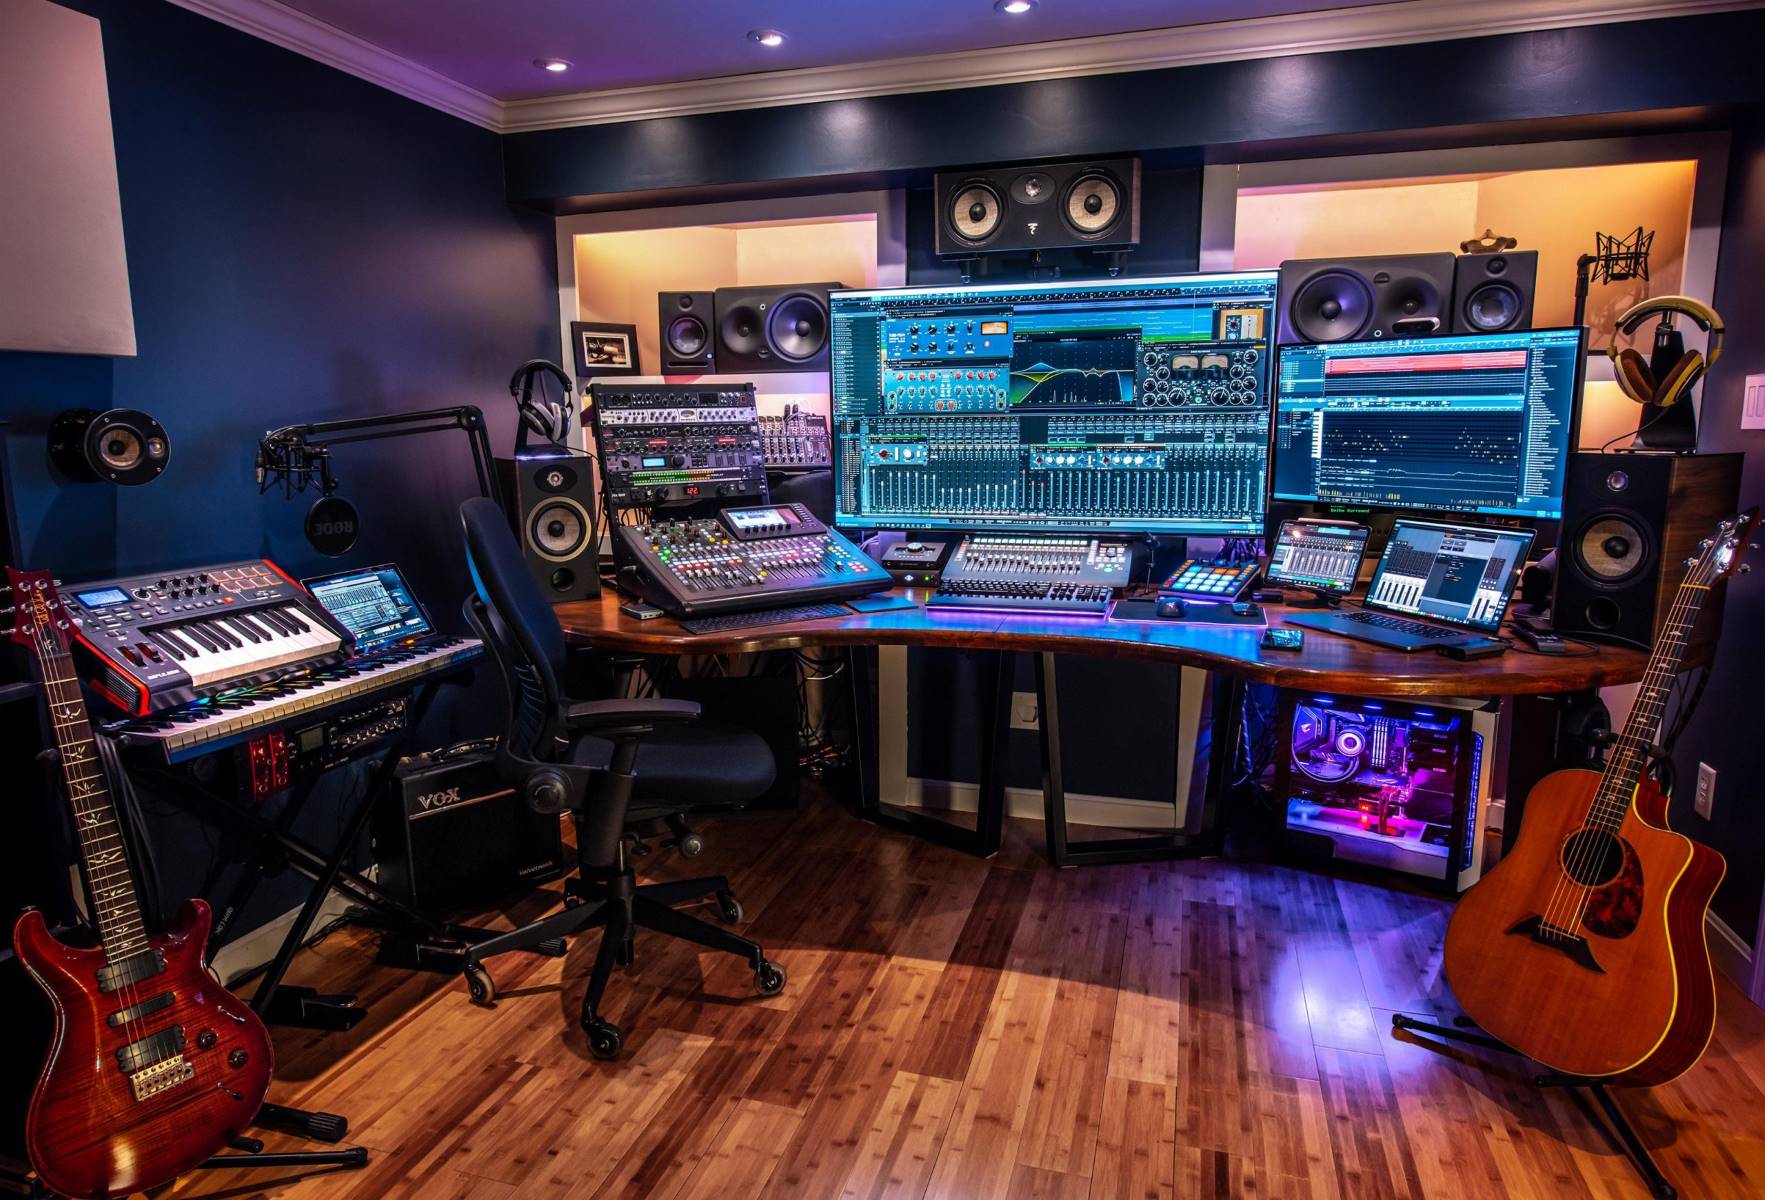 How To Design A Music Studio In A House